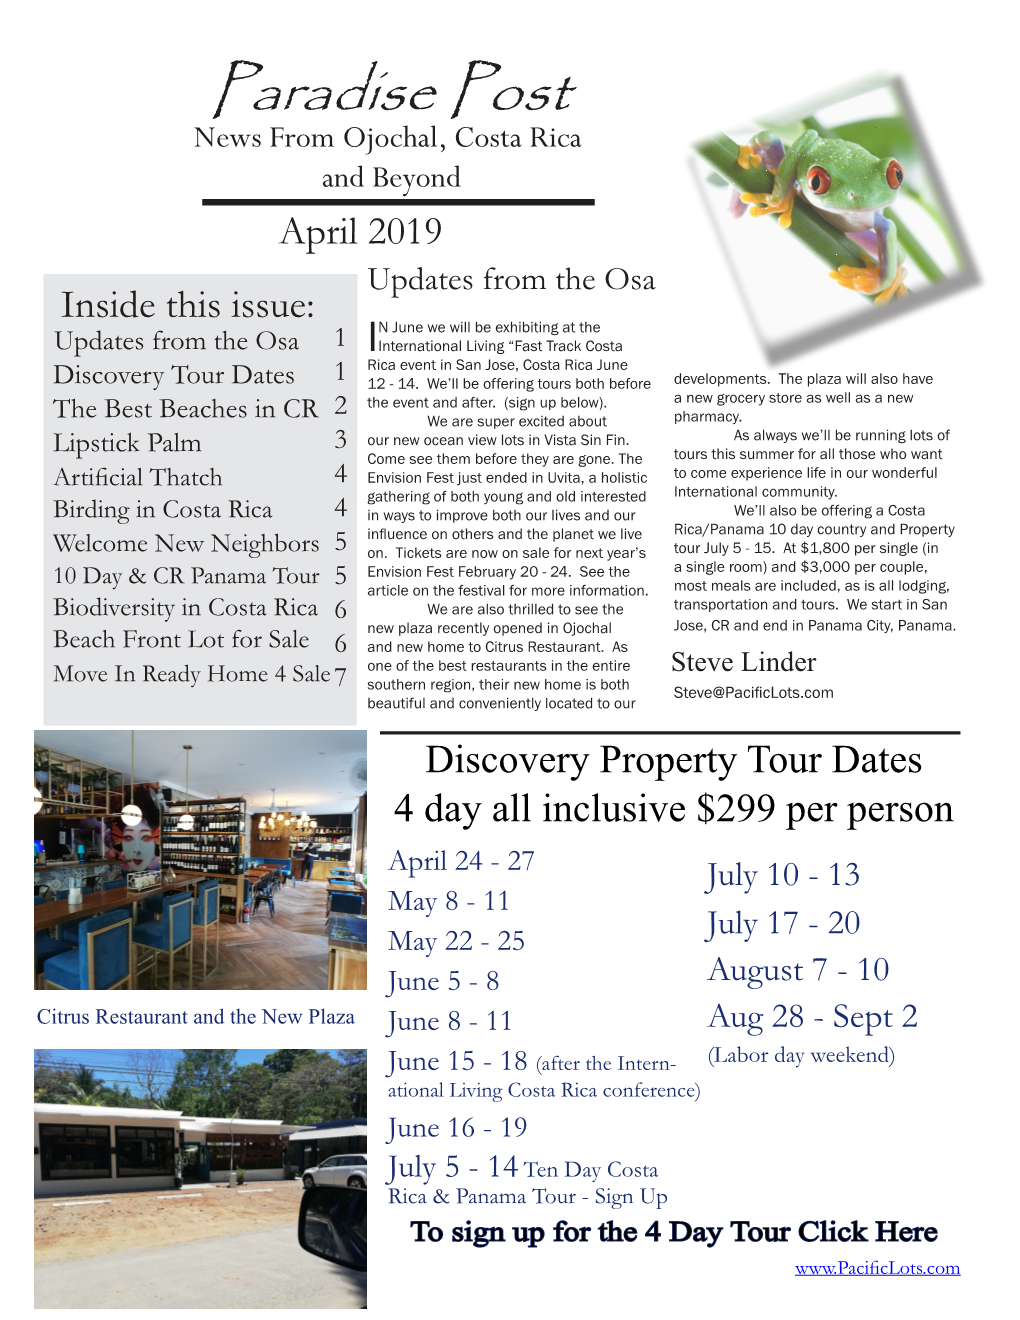 April 2019 Issue of the Paradise Post